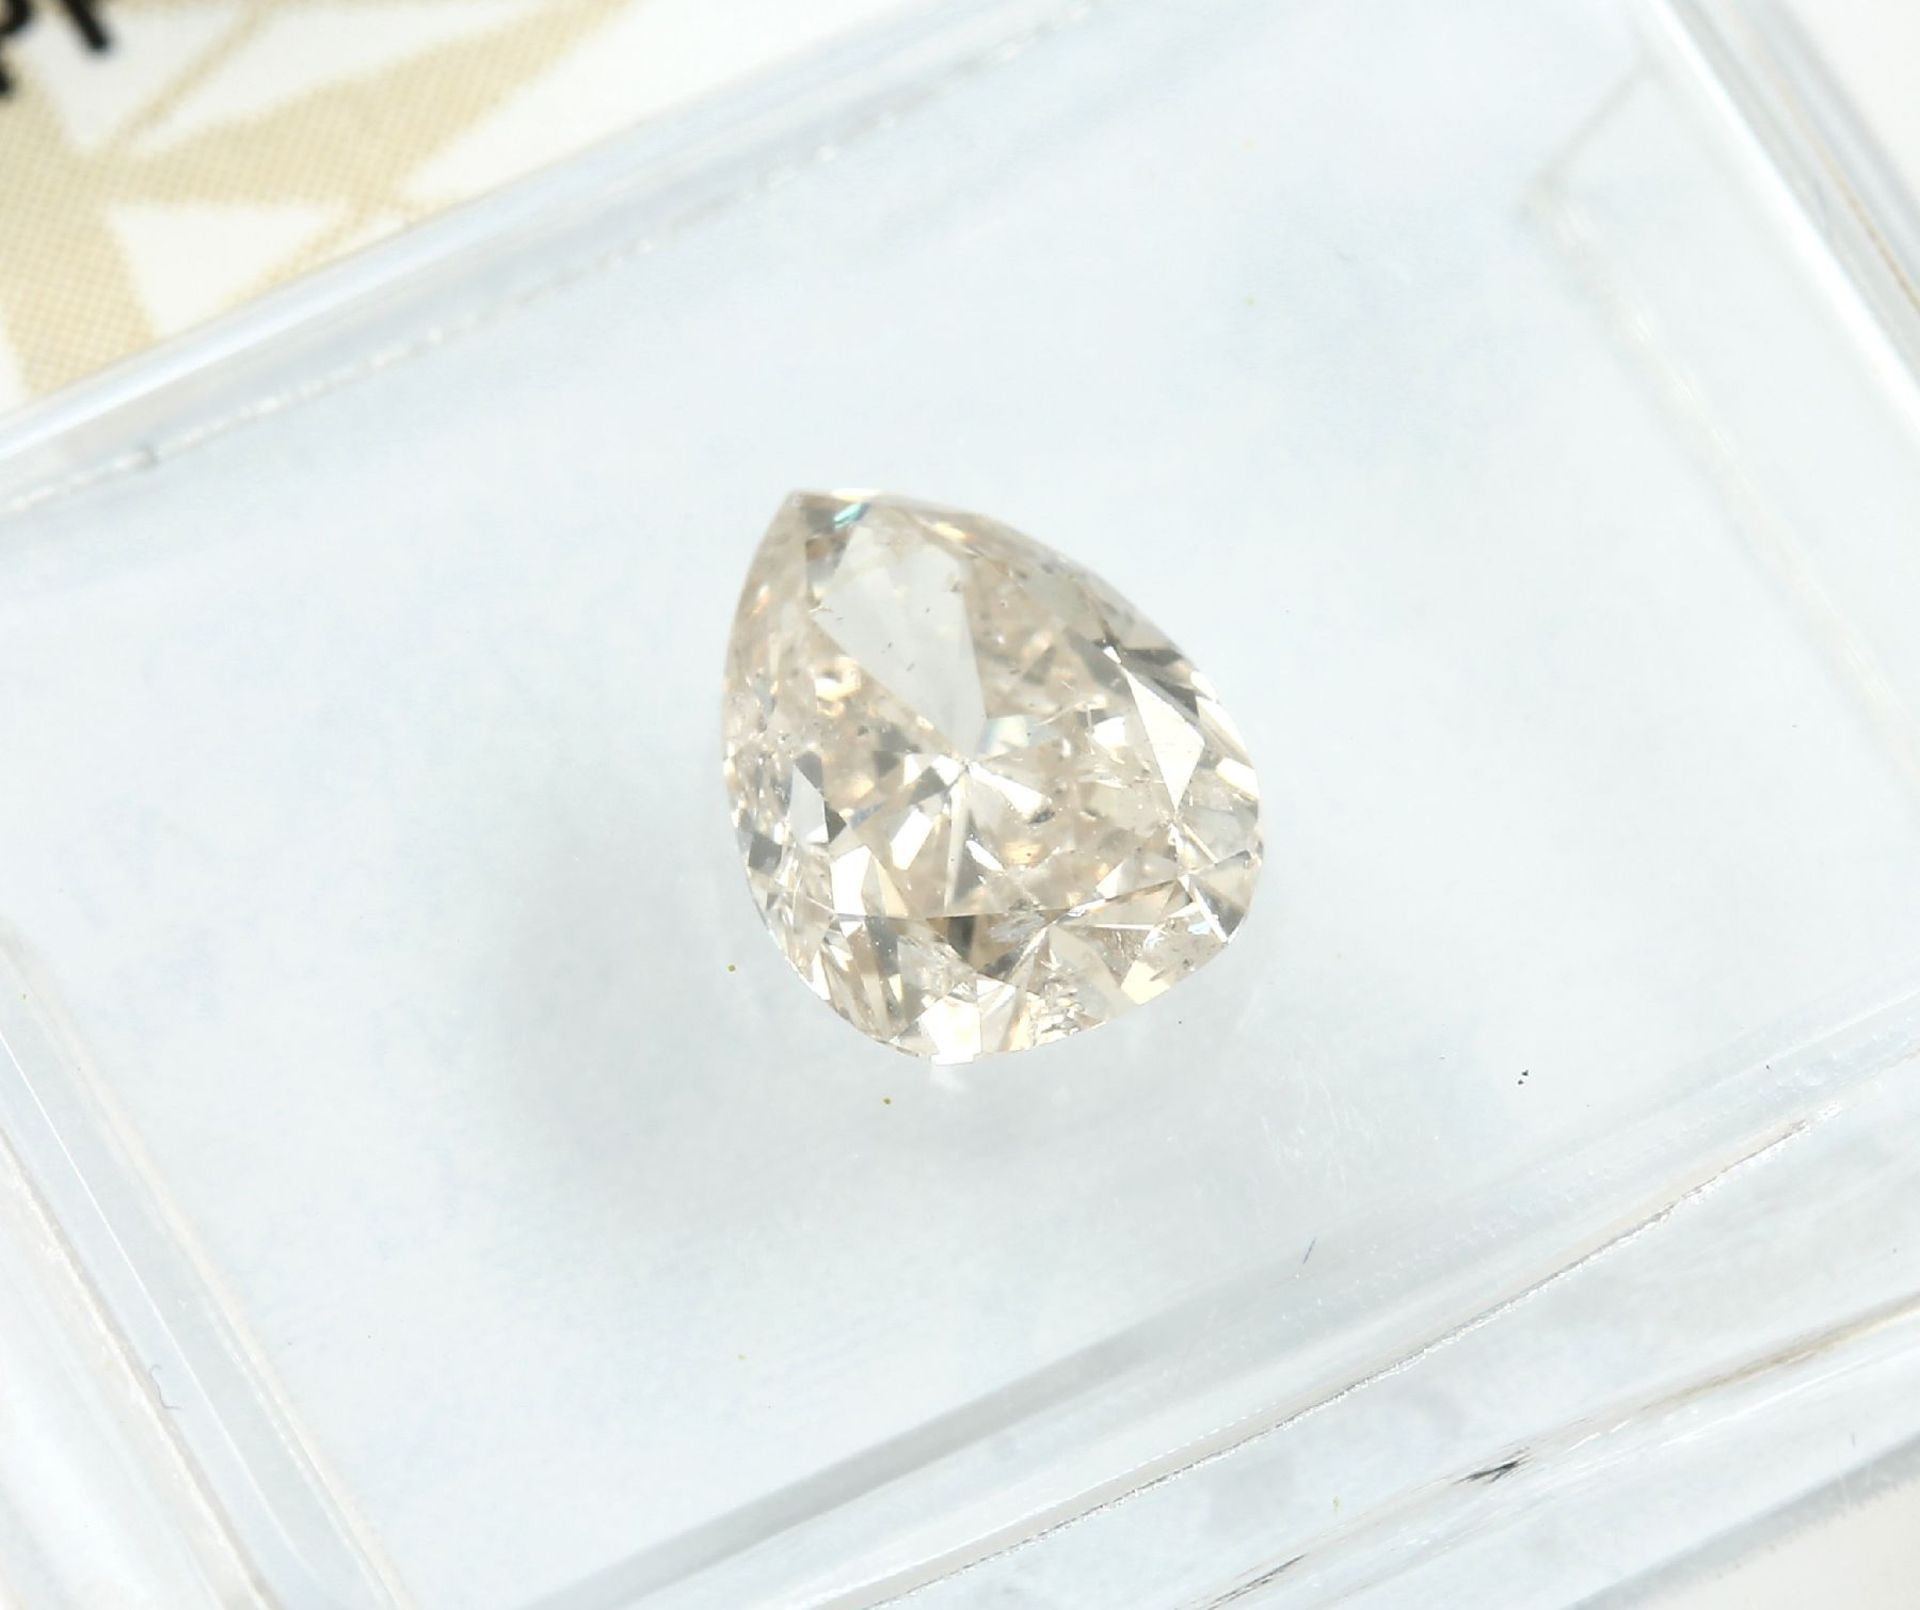 Loser Diamant, 1 ct Natural fancy light yellow-brown, - Image 3 of 3